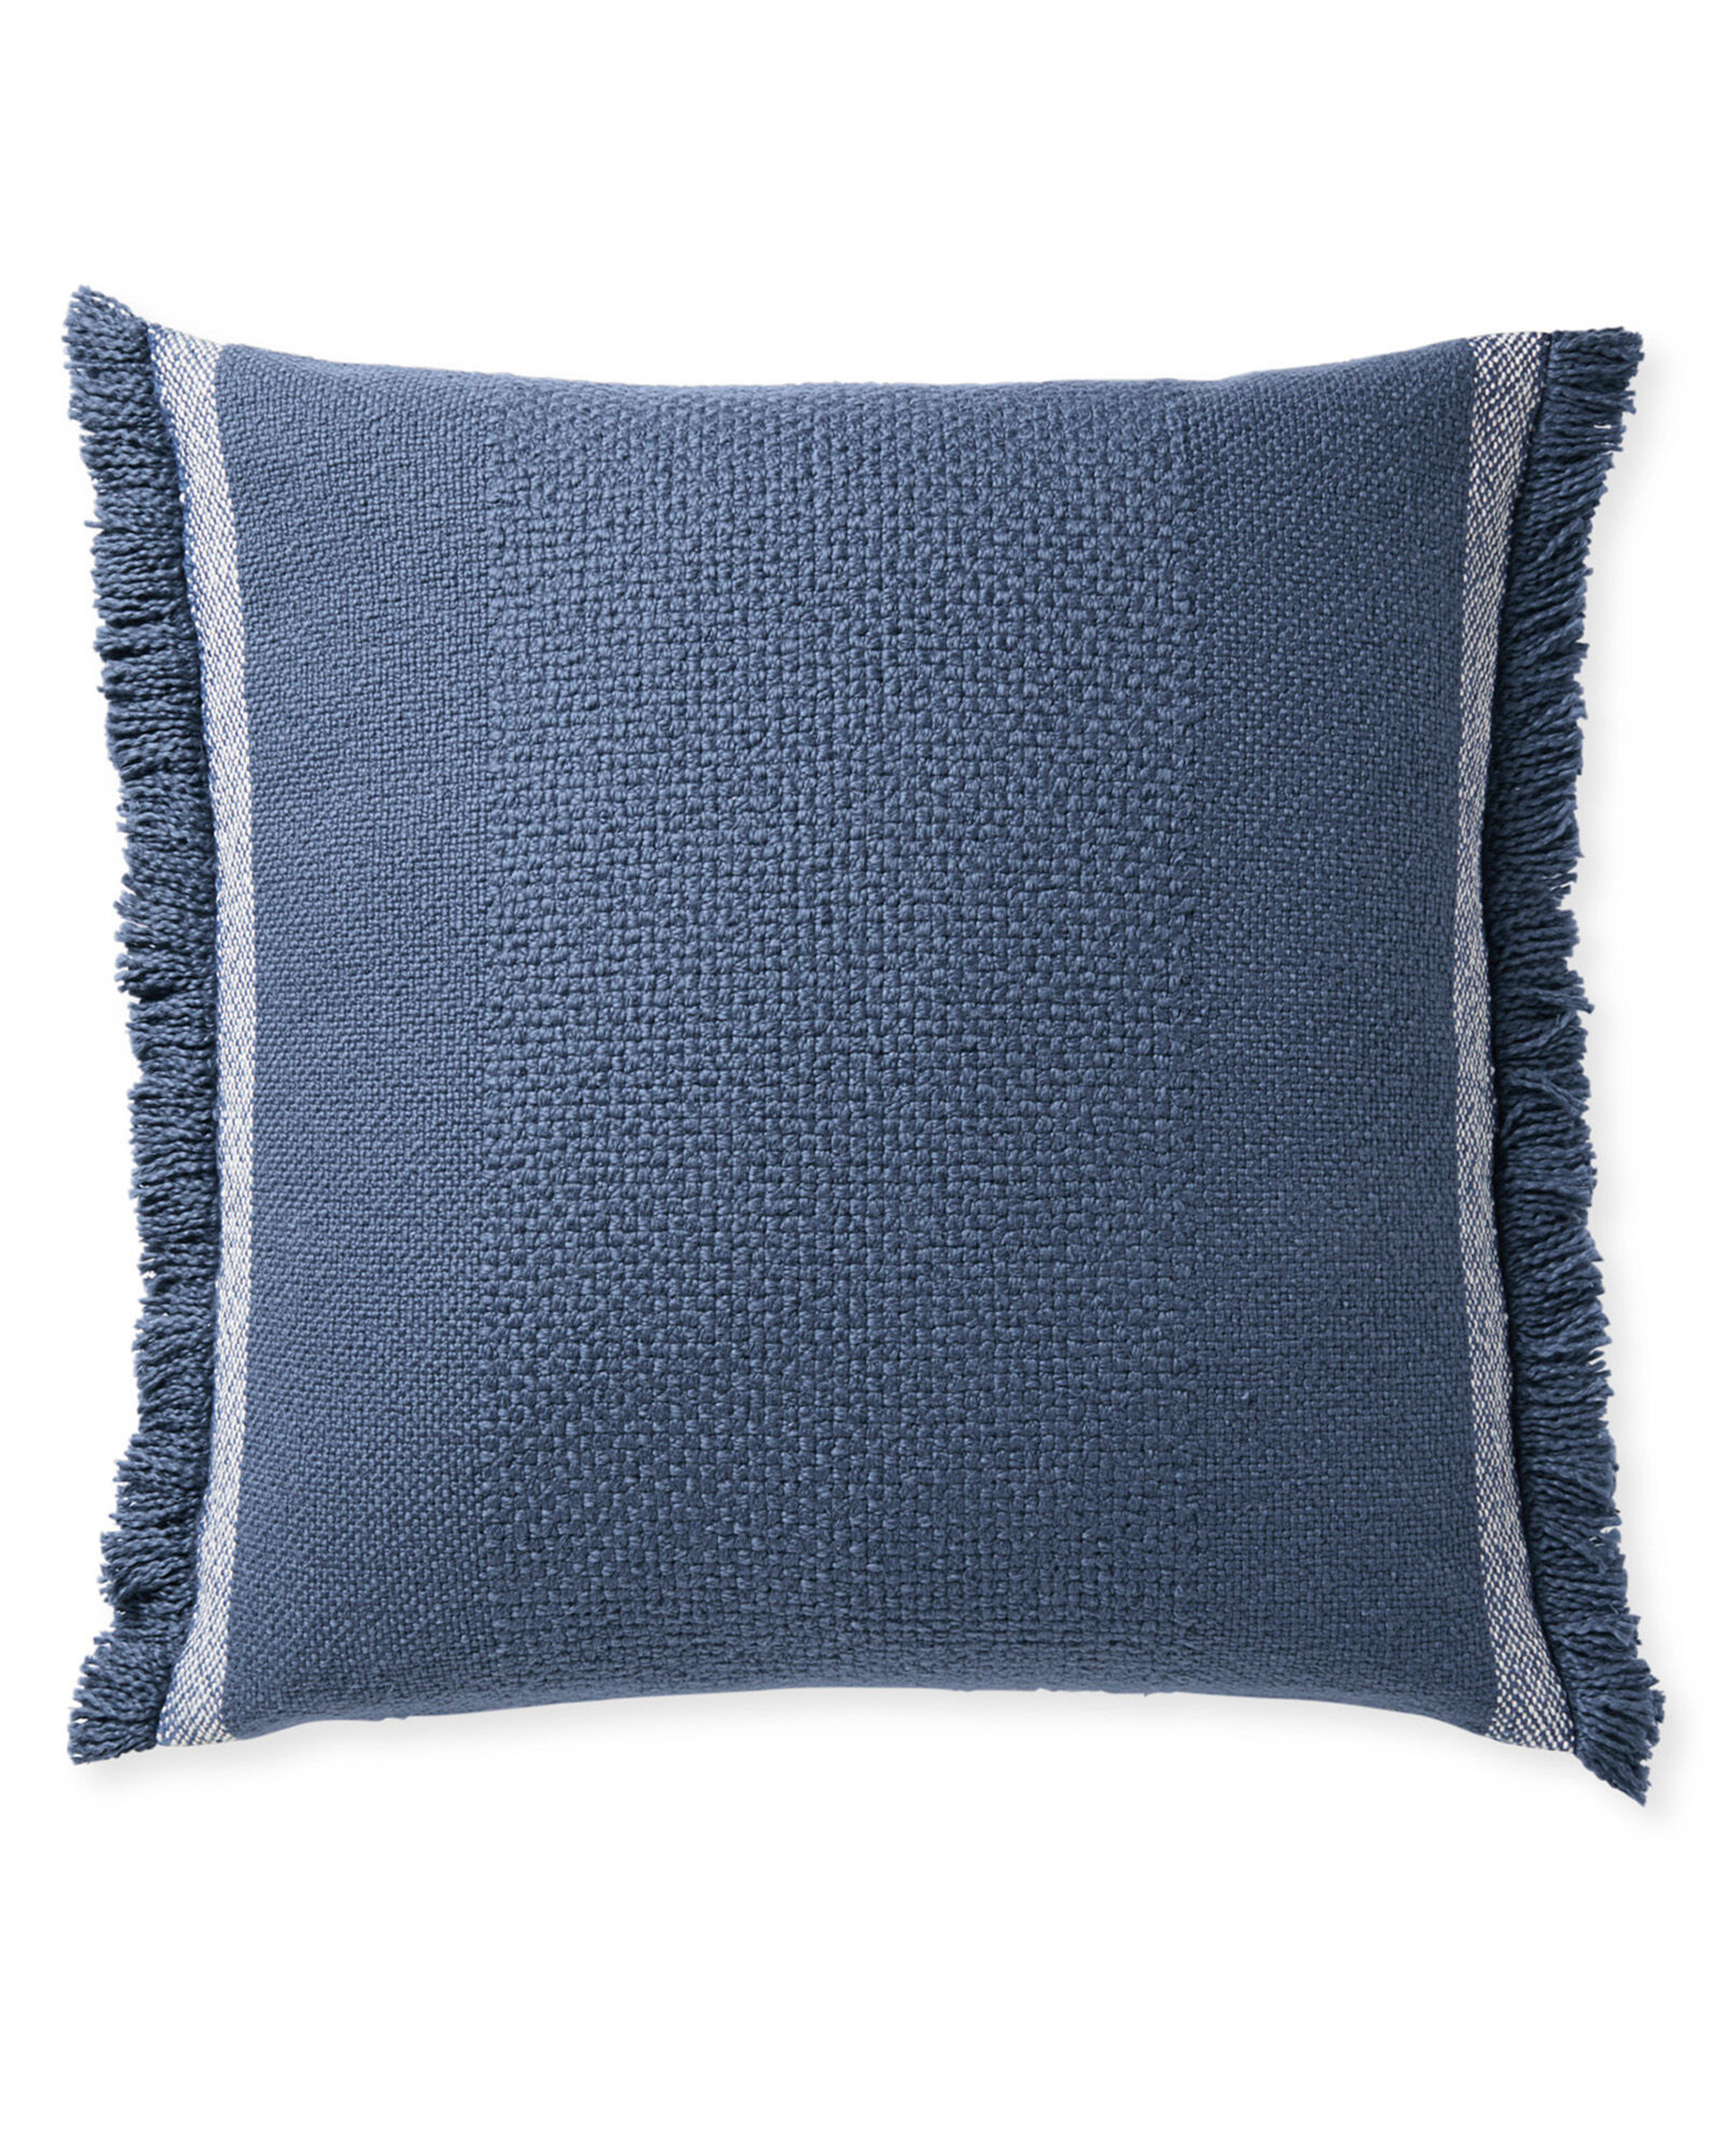 Corfu Pillow Cover - Serena and Lily